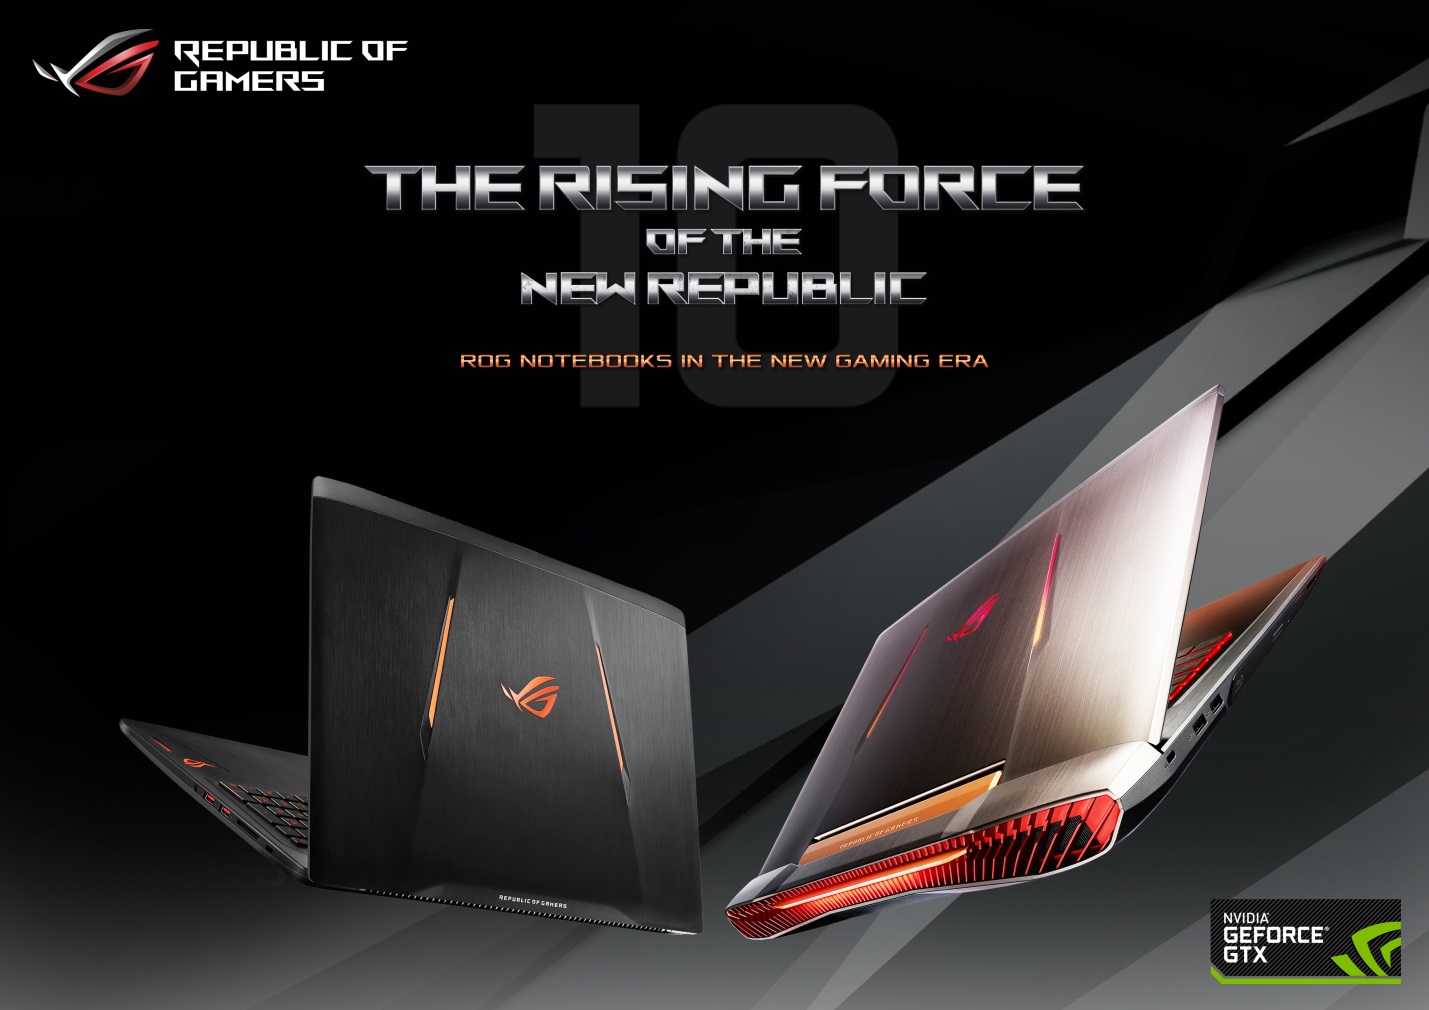 ASUS Announces Updated Versions/New Series of Gaming Laptops with NVIDIA GeForce GTX 10 Series Graphics Cards: Prices and Availability